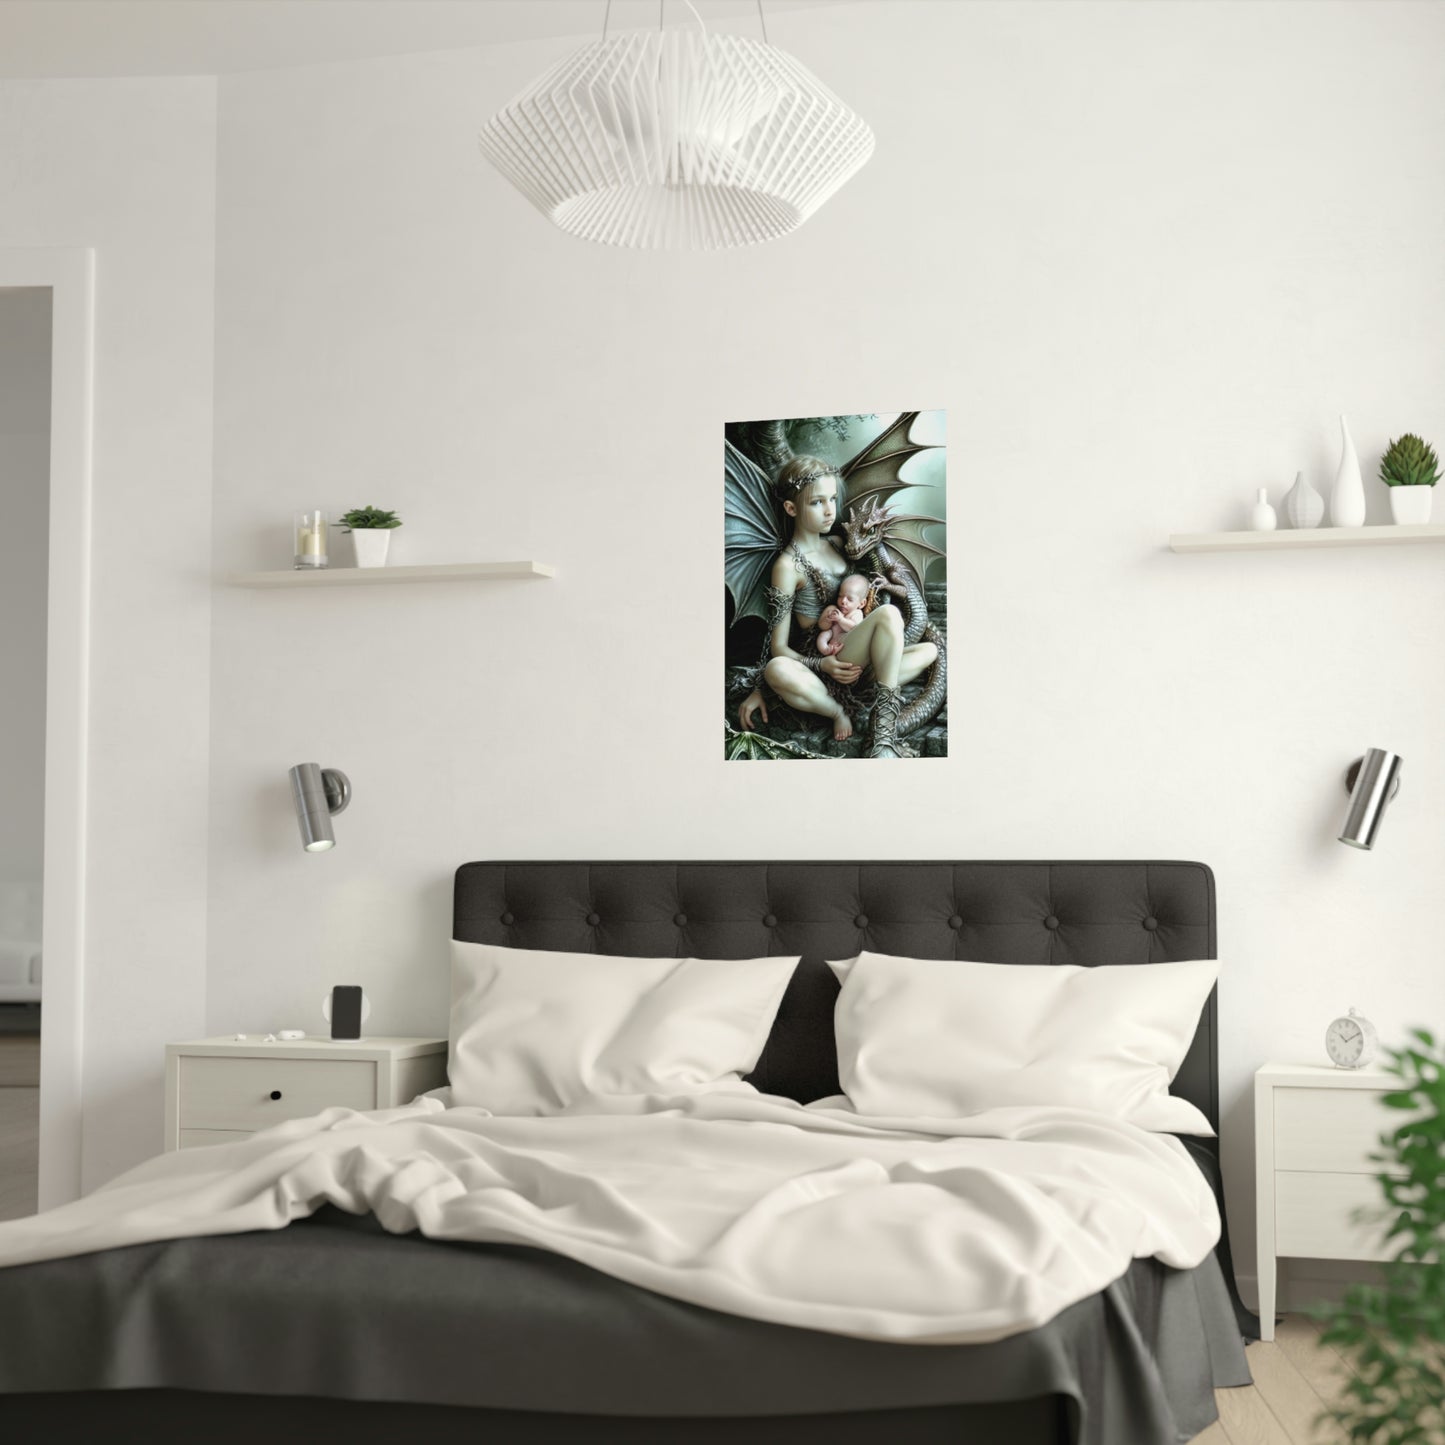 Fairy 1 Satin Posters (210gsm)